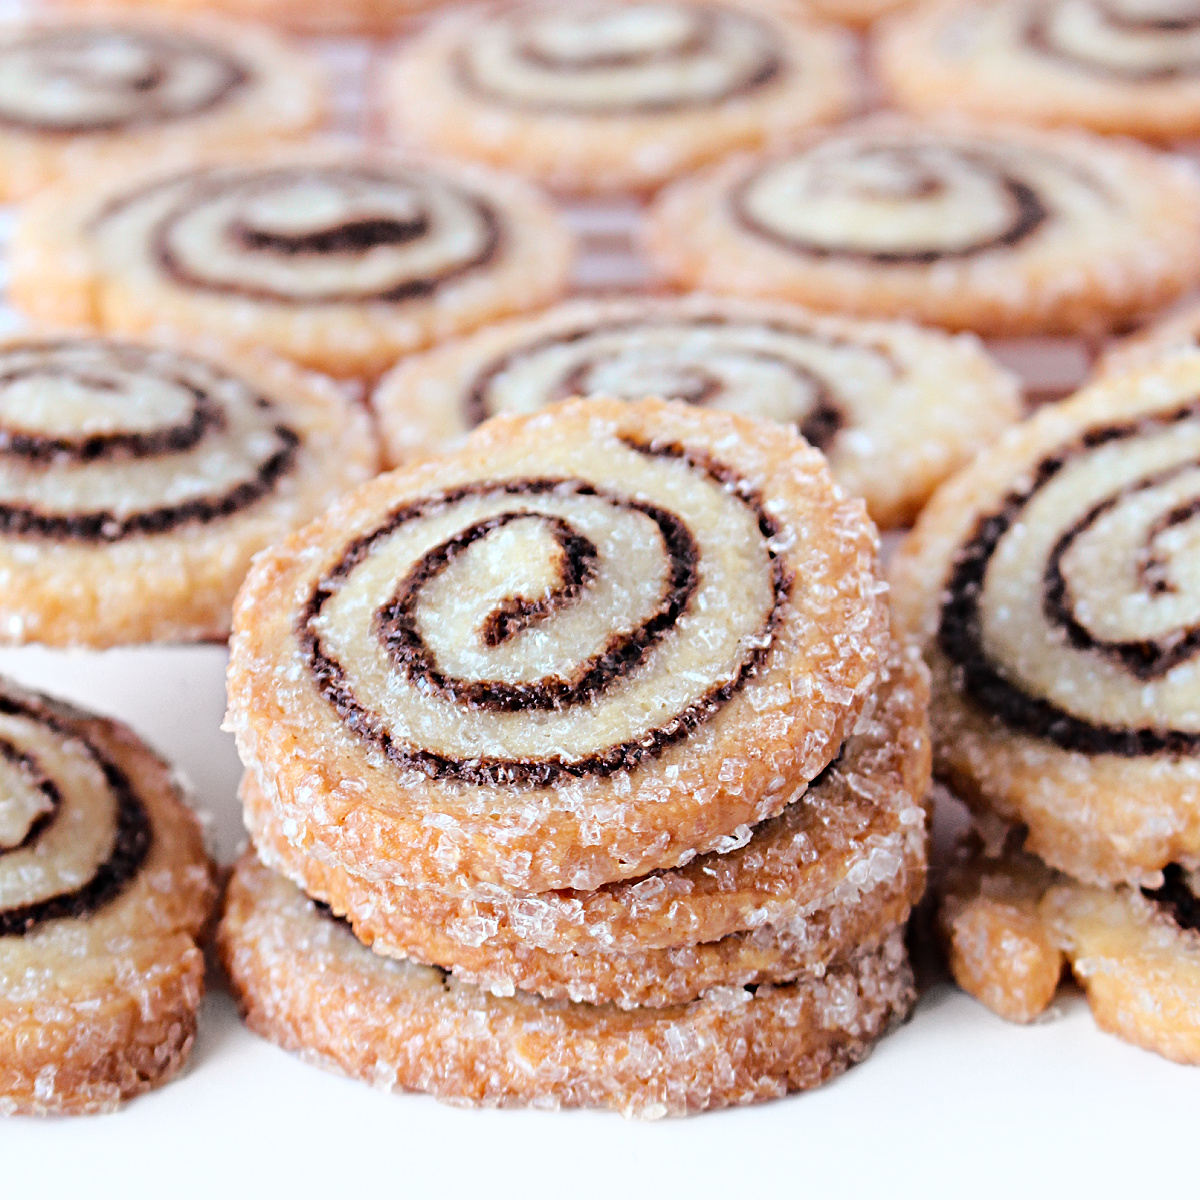 Closeup stack of rugelach cookies showing sugar coating and spiral of chocolate filling.